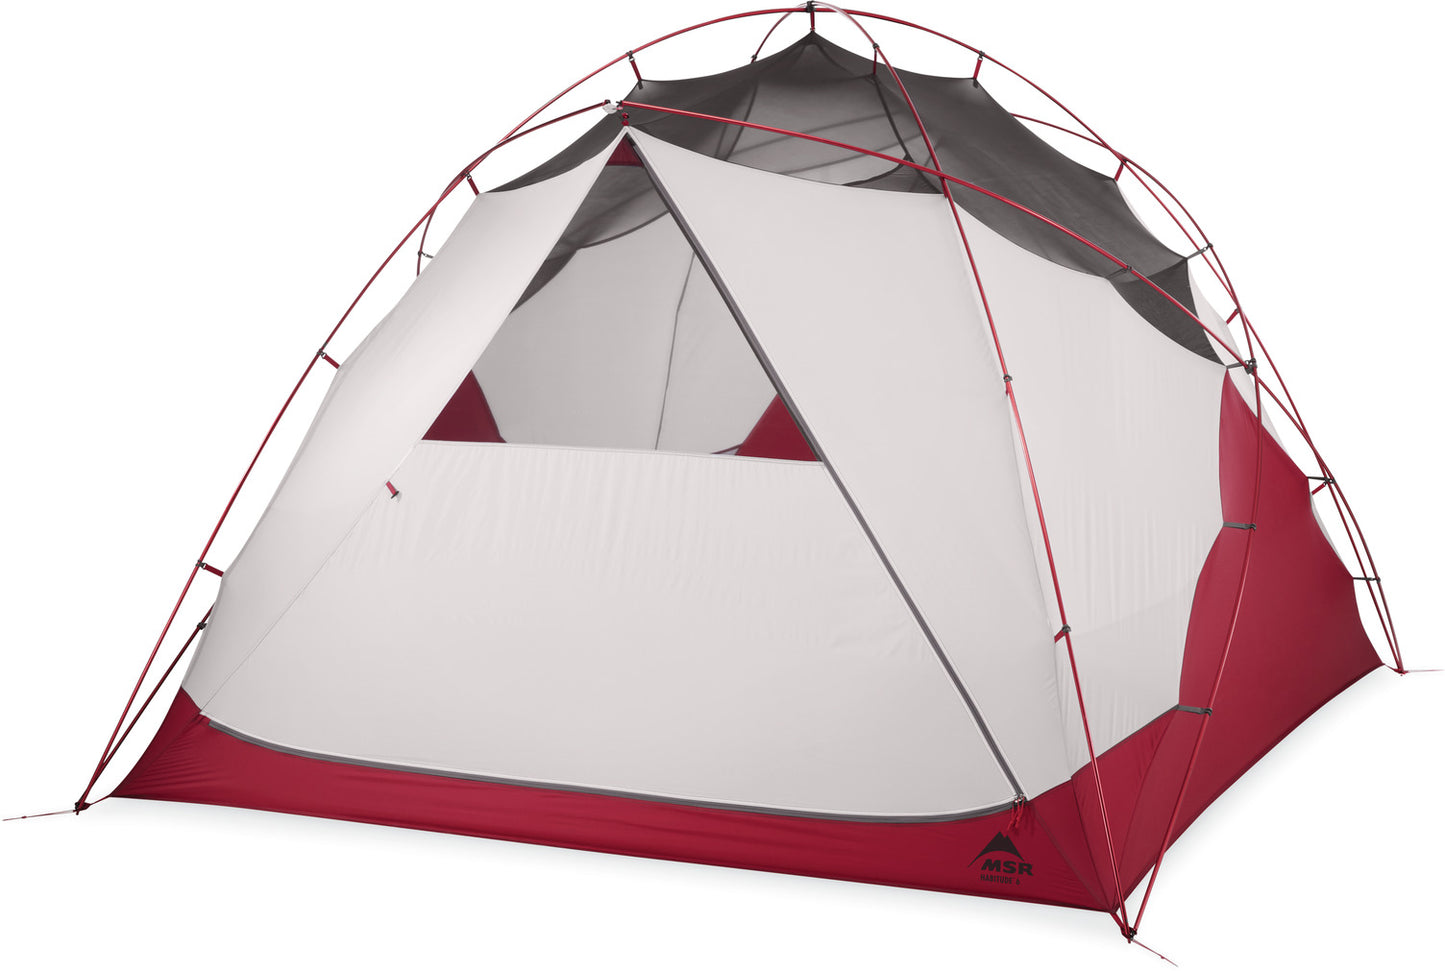 Habitude 6 Family & Group Camping Tent - by MSR